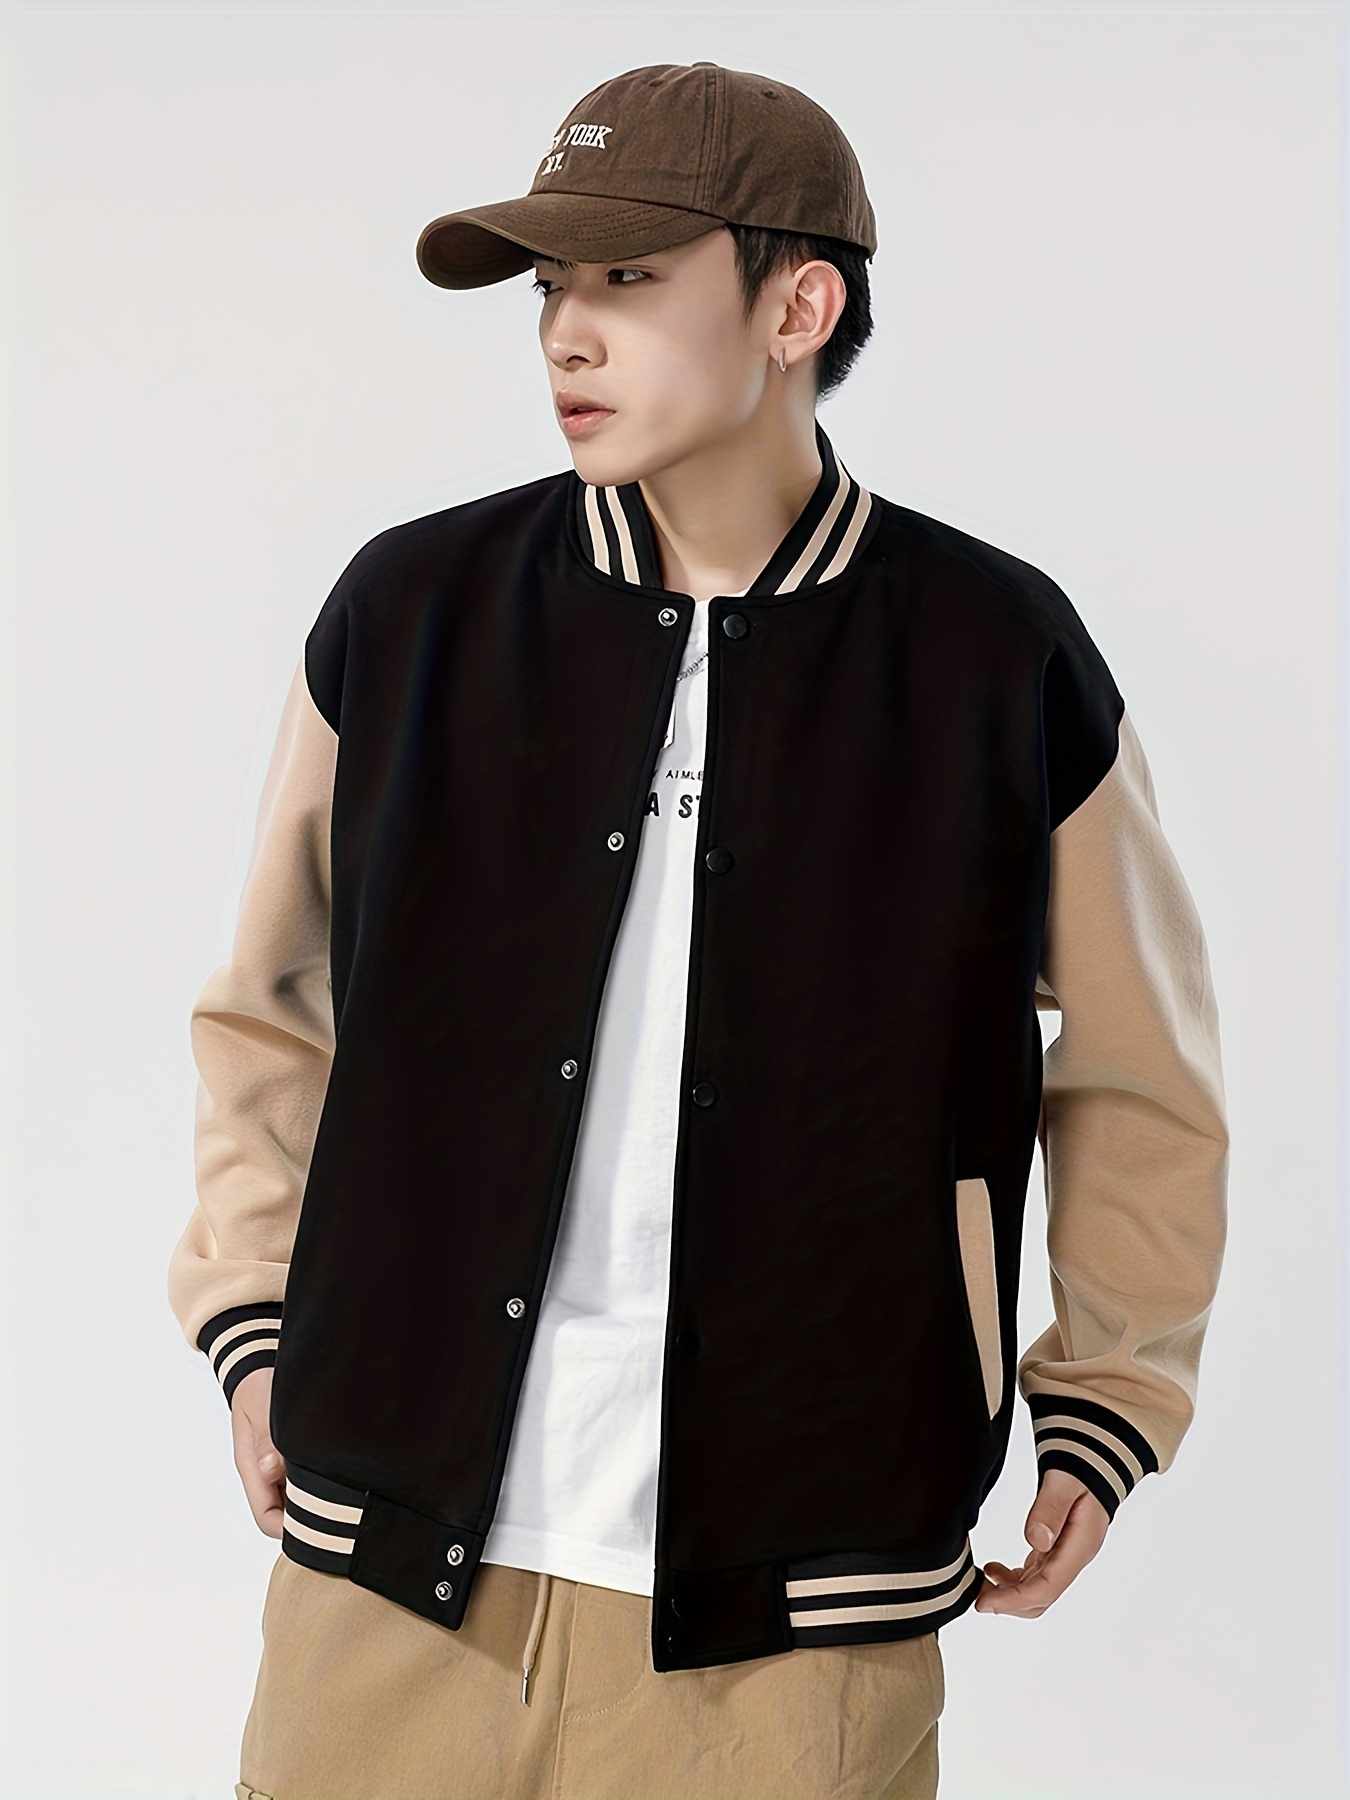 Beige Baseball Cap with Tan Jacket Casual Outfits For Men In Their